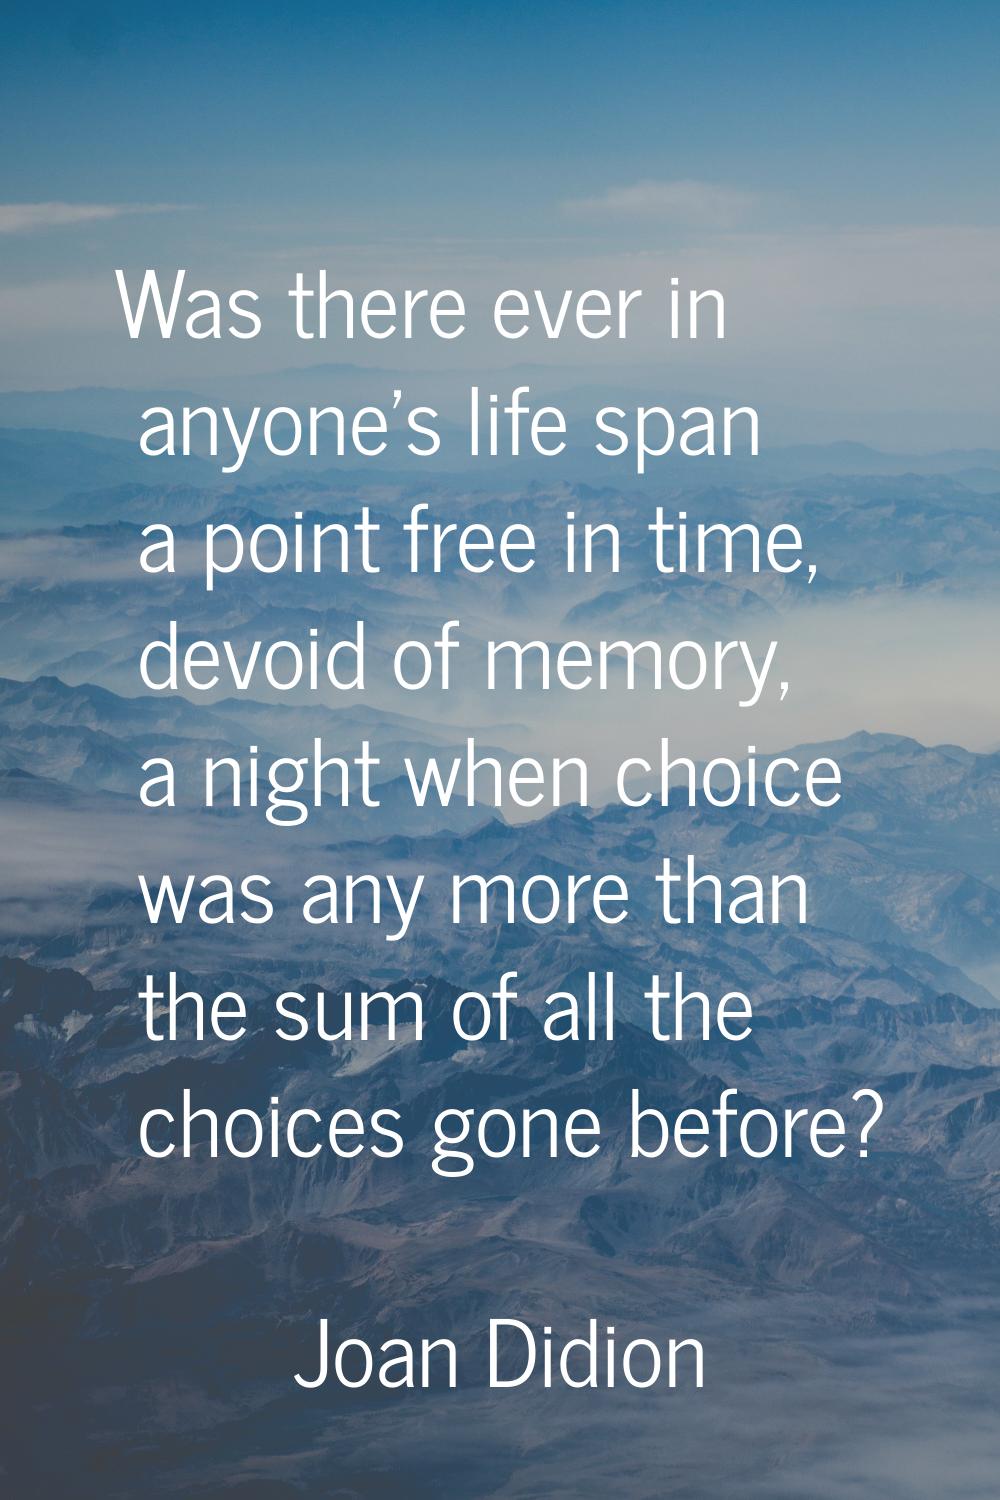 Was there ever in anyone's life span a point free in time, devoid of memory, a night when choice wa